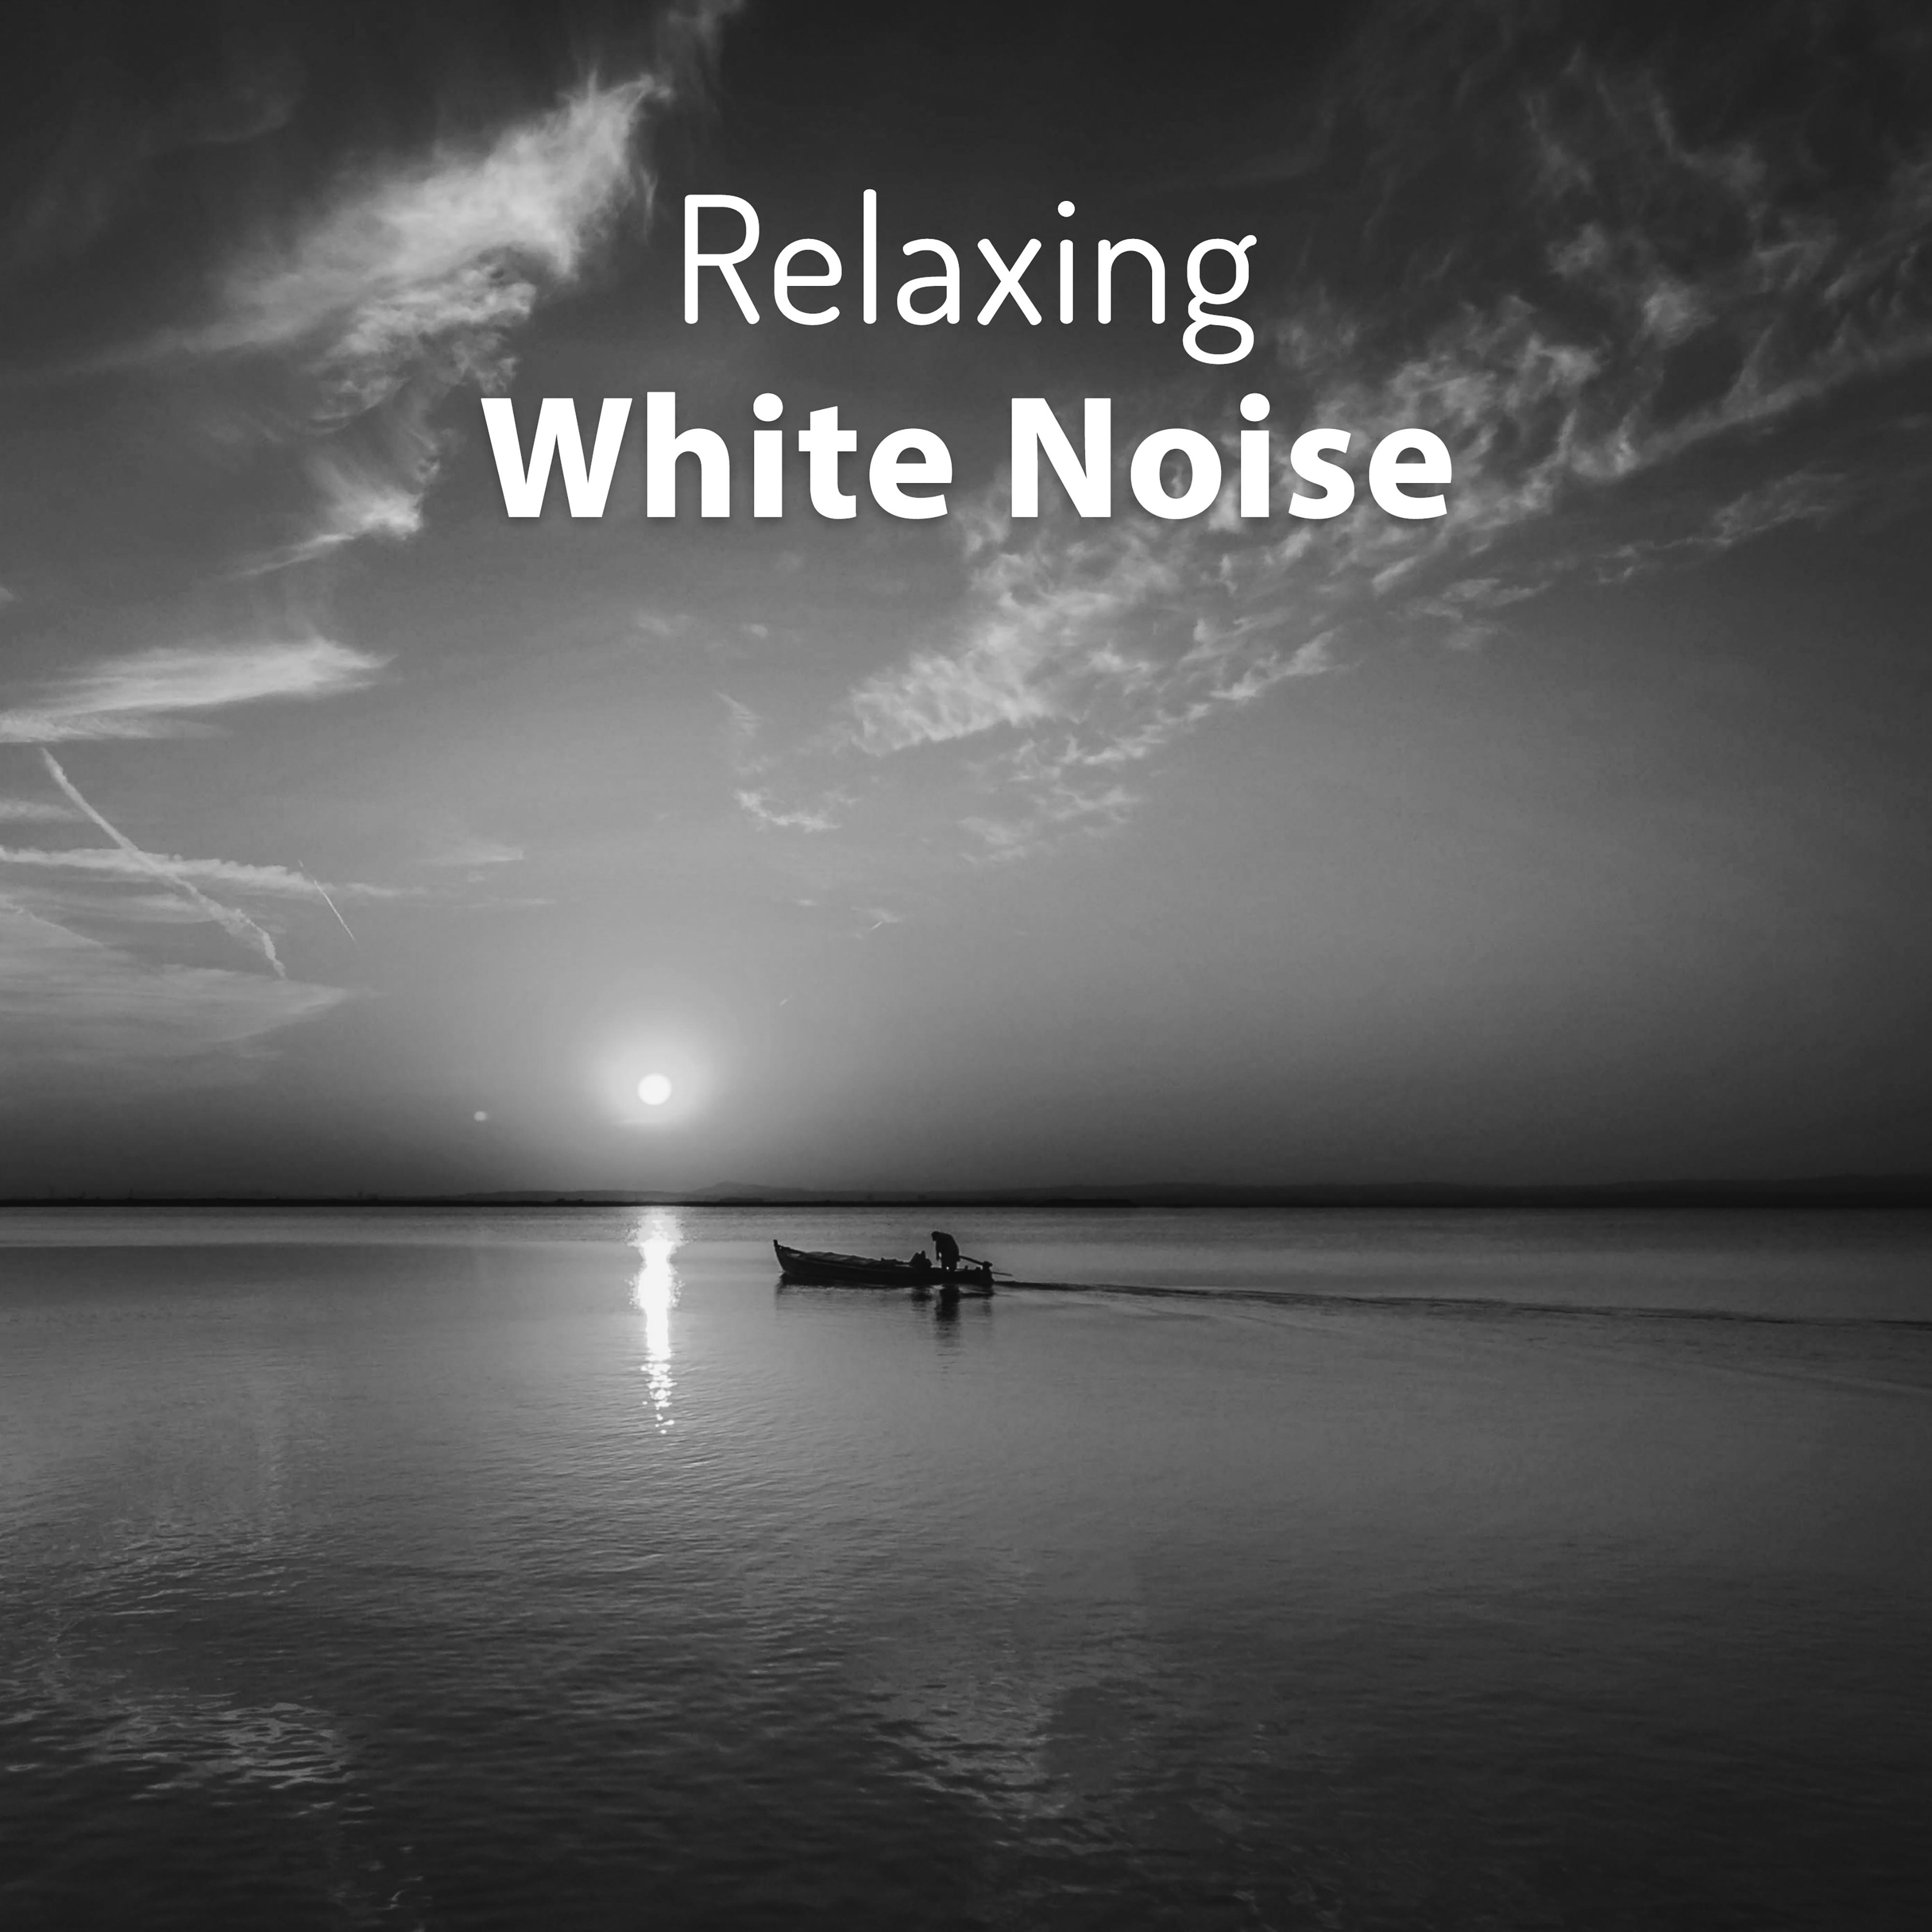 Relaxing White Noise  Serenity Nature Music, White Noise, Sleep, Relax, Calming New Age